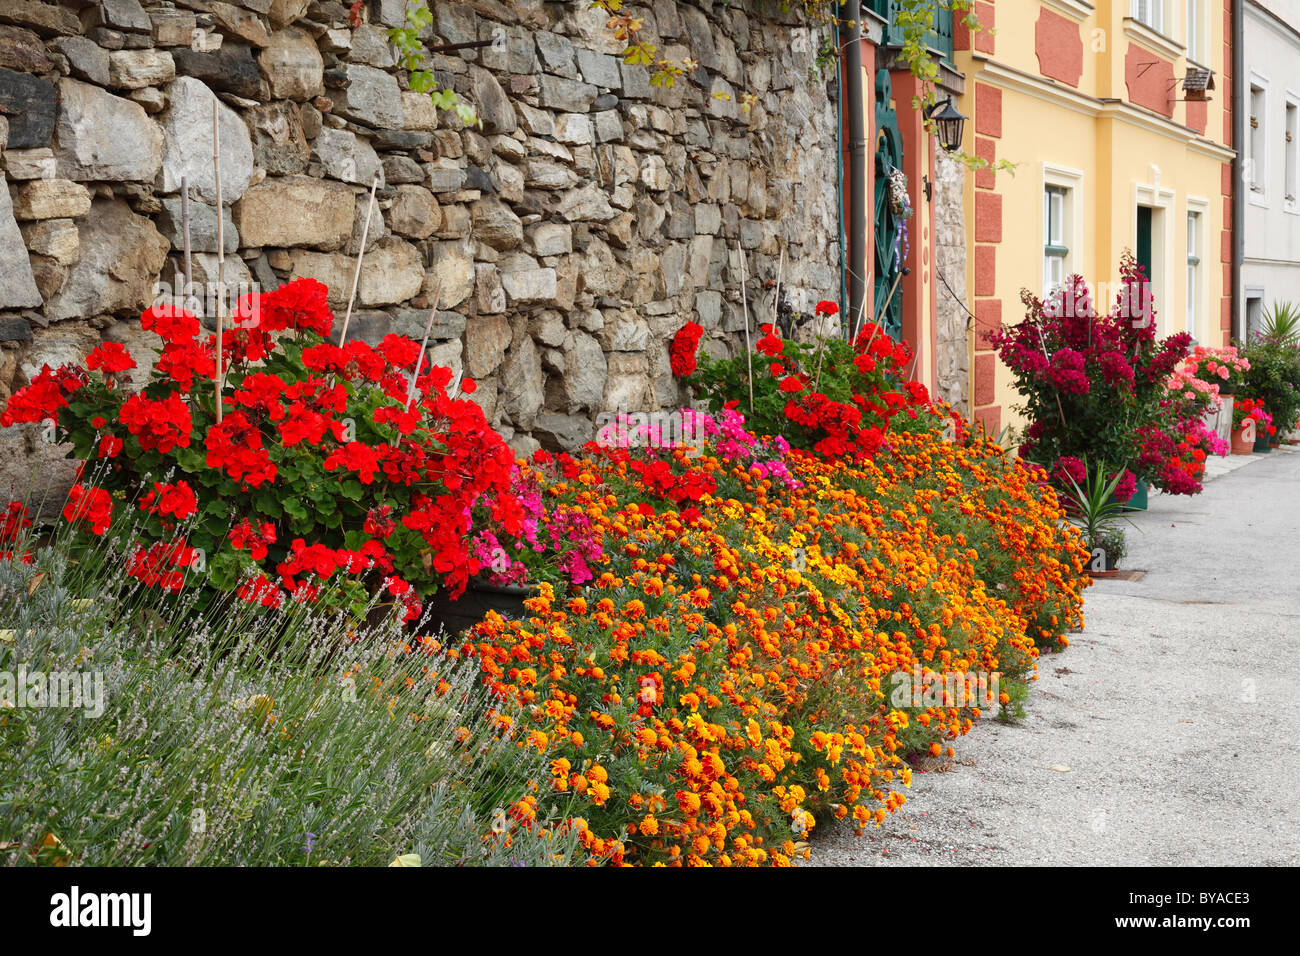 Flowers in front of a wall in the historic town centre of Spitz, Wachau, Waldviertel, Forest Quarter, Lower Austria, Austria Stock Photo